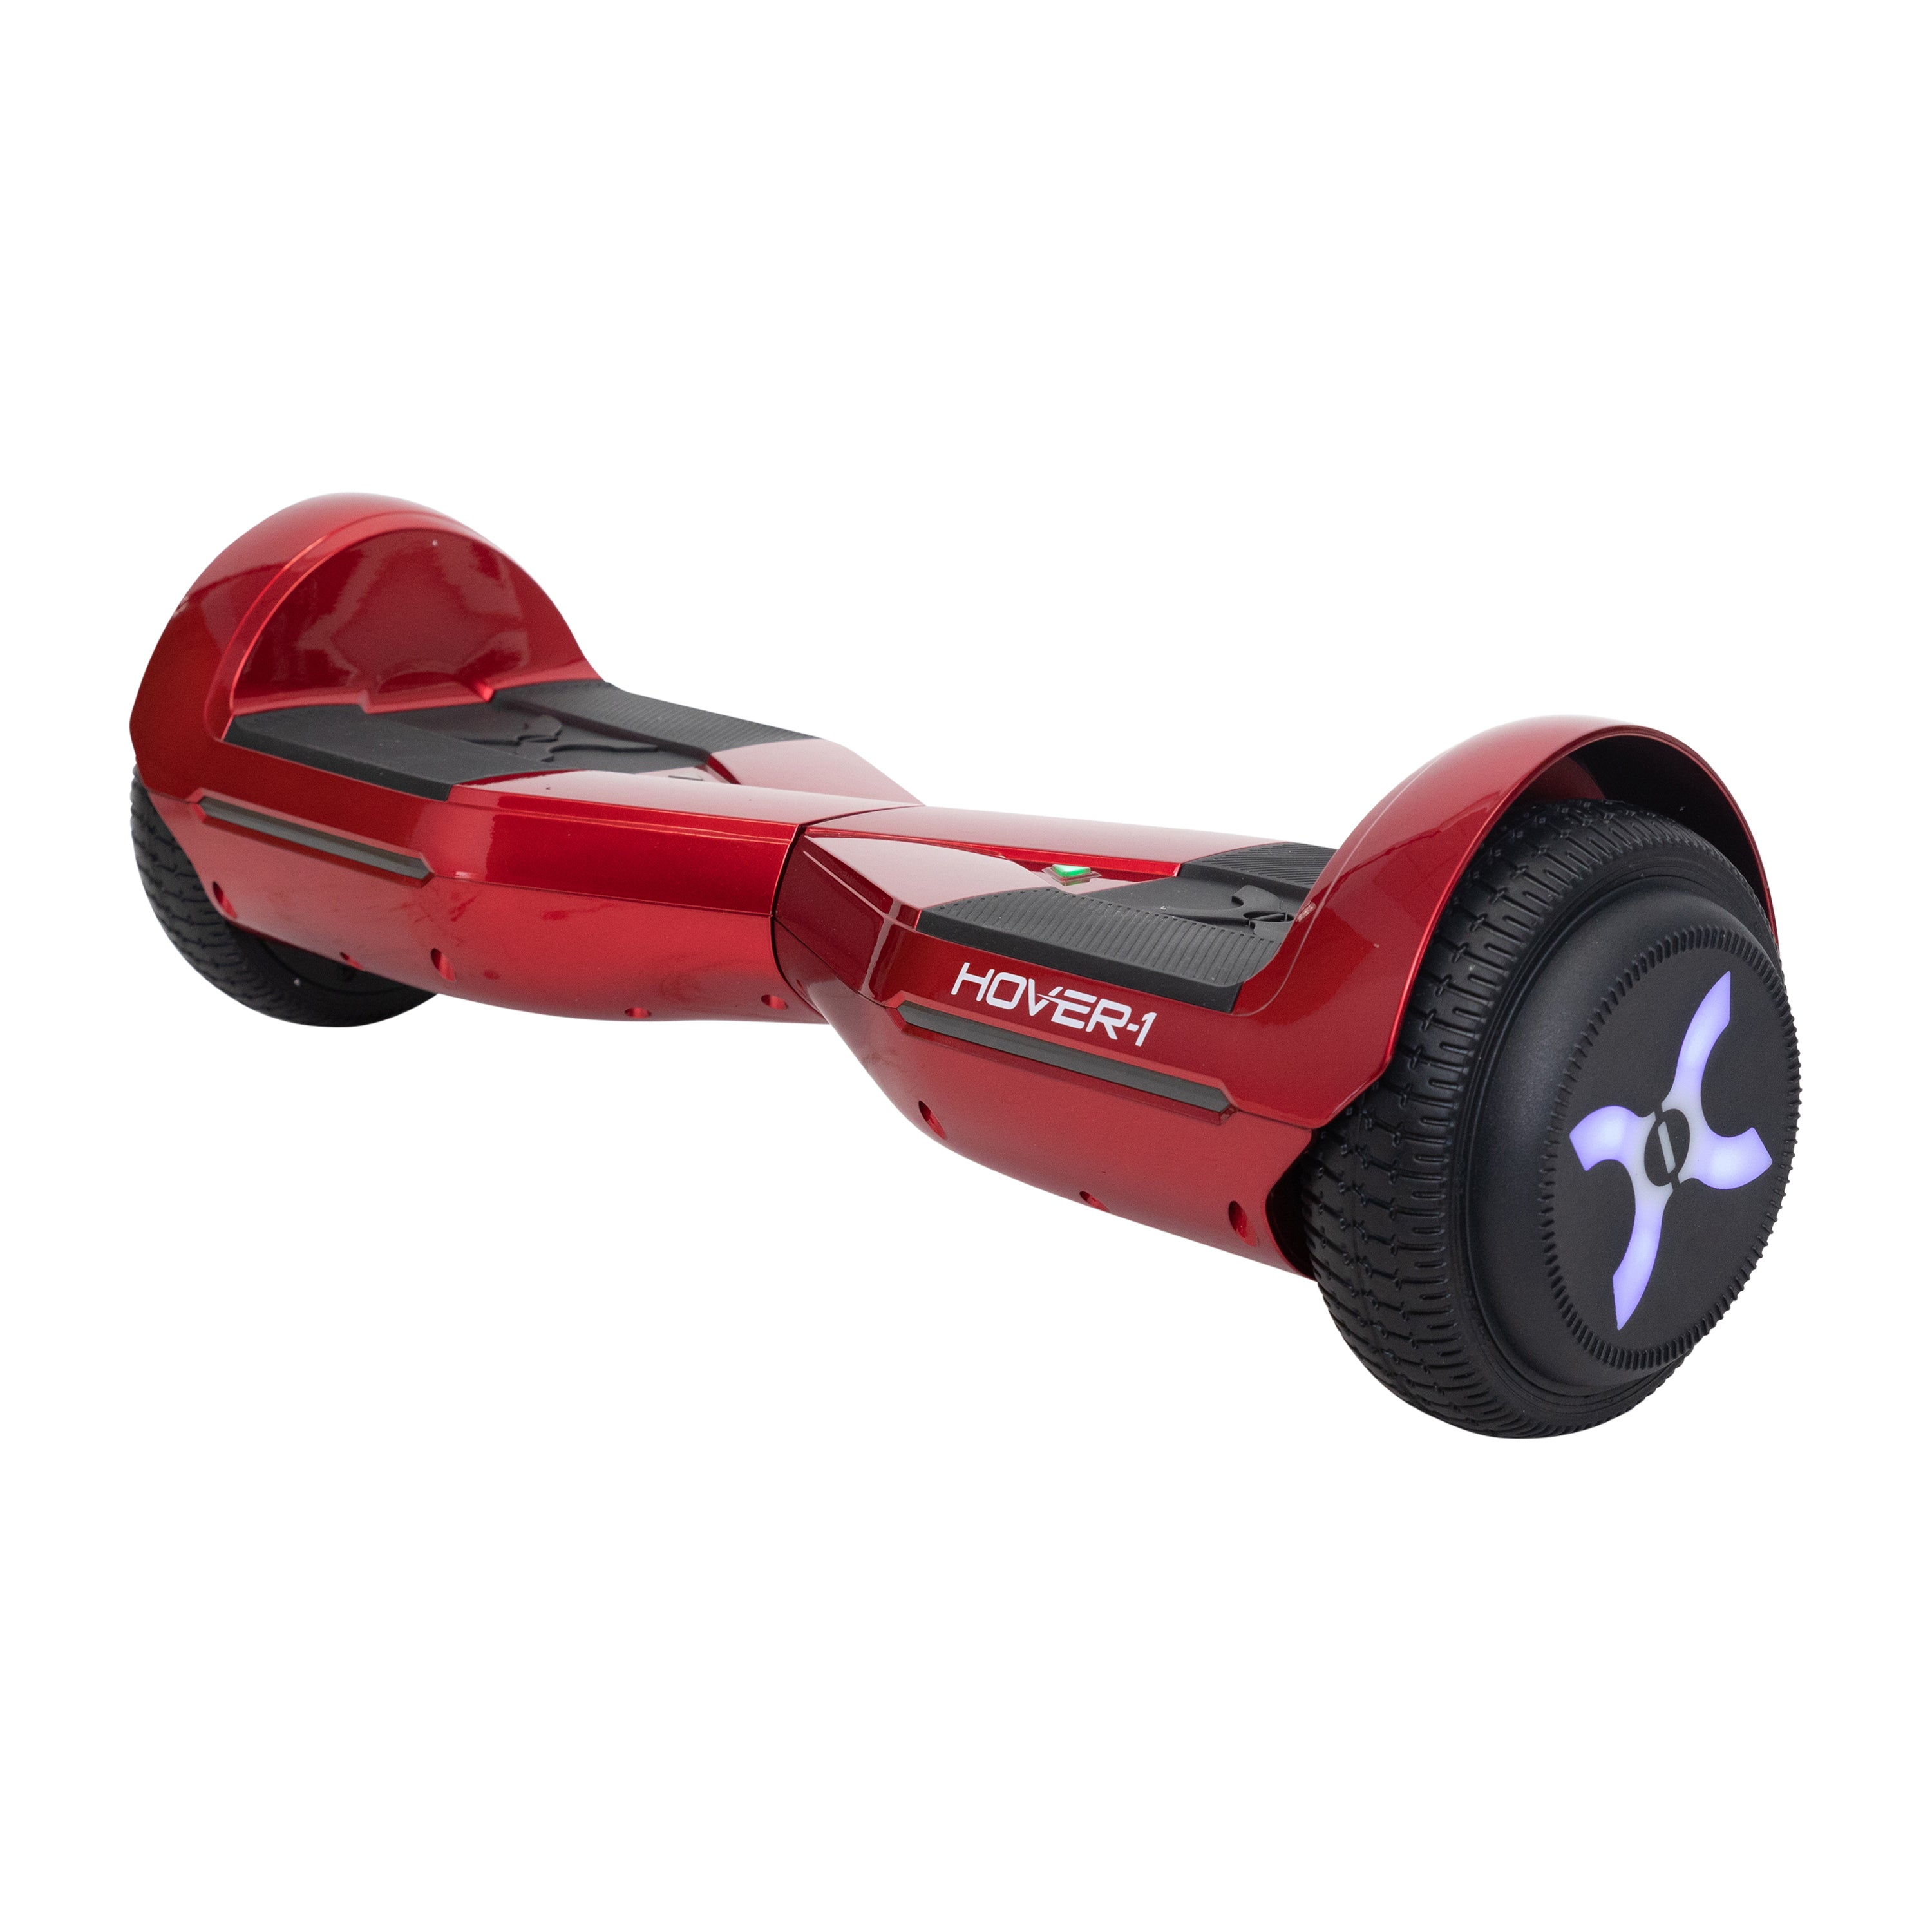 Hover-1™ Dream Hoverboard